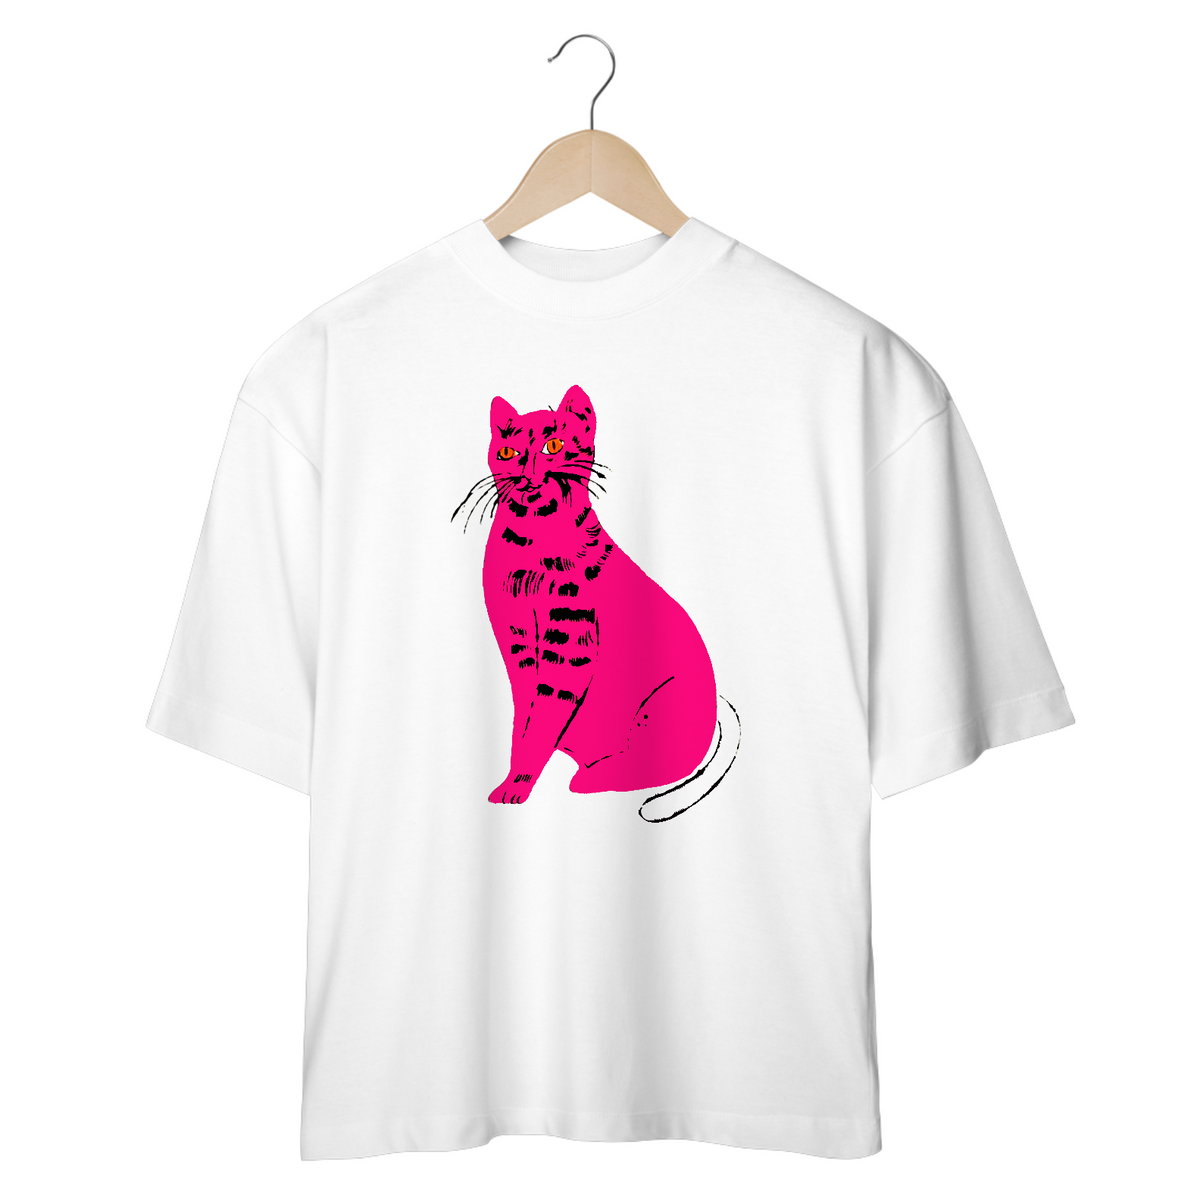 Nome do produto: Andy Warhol Pink Cat Oversized